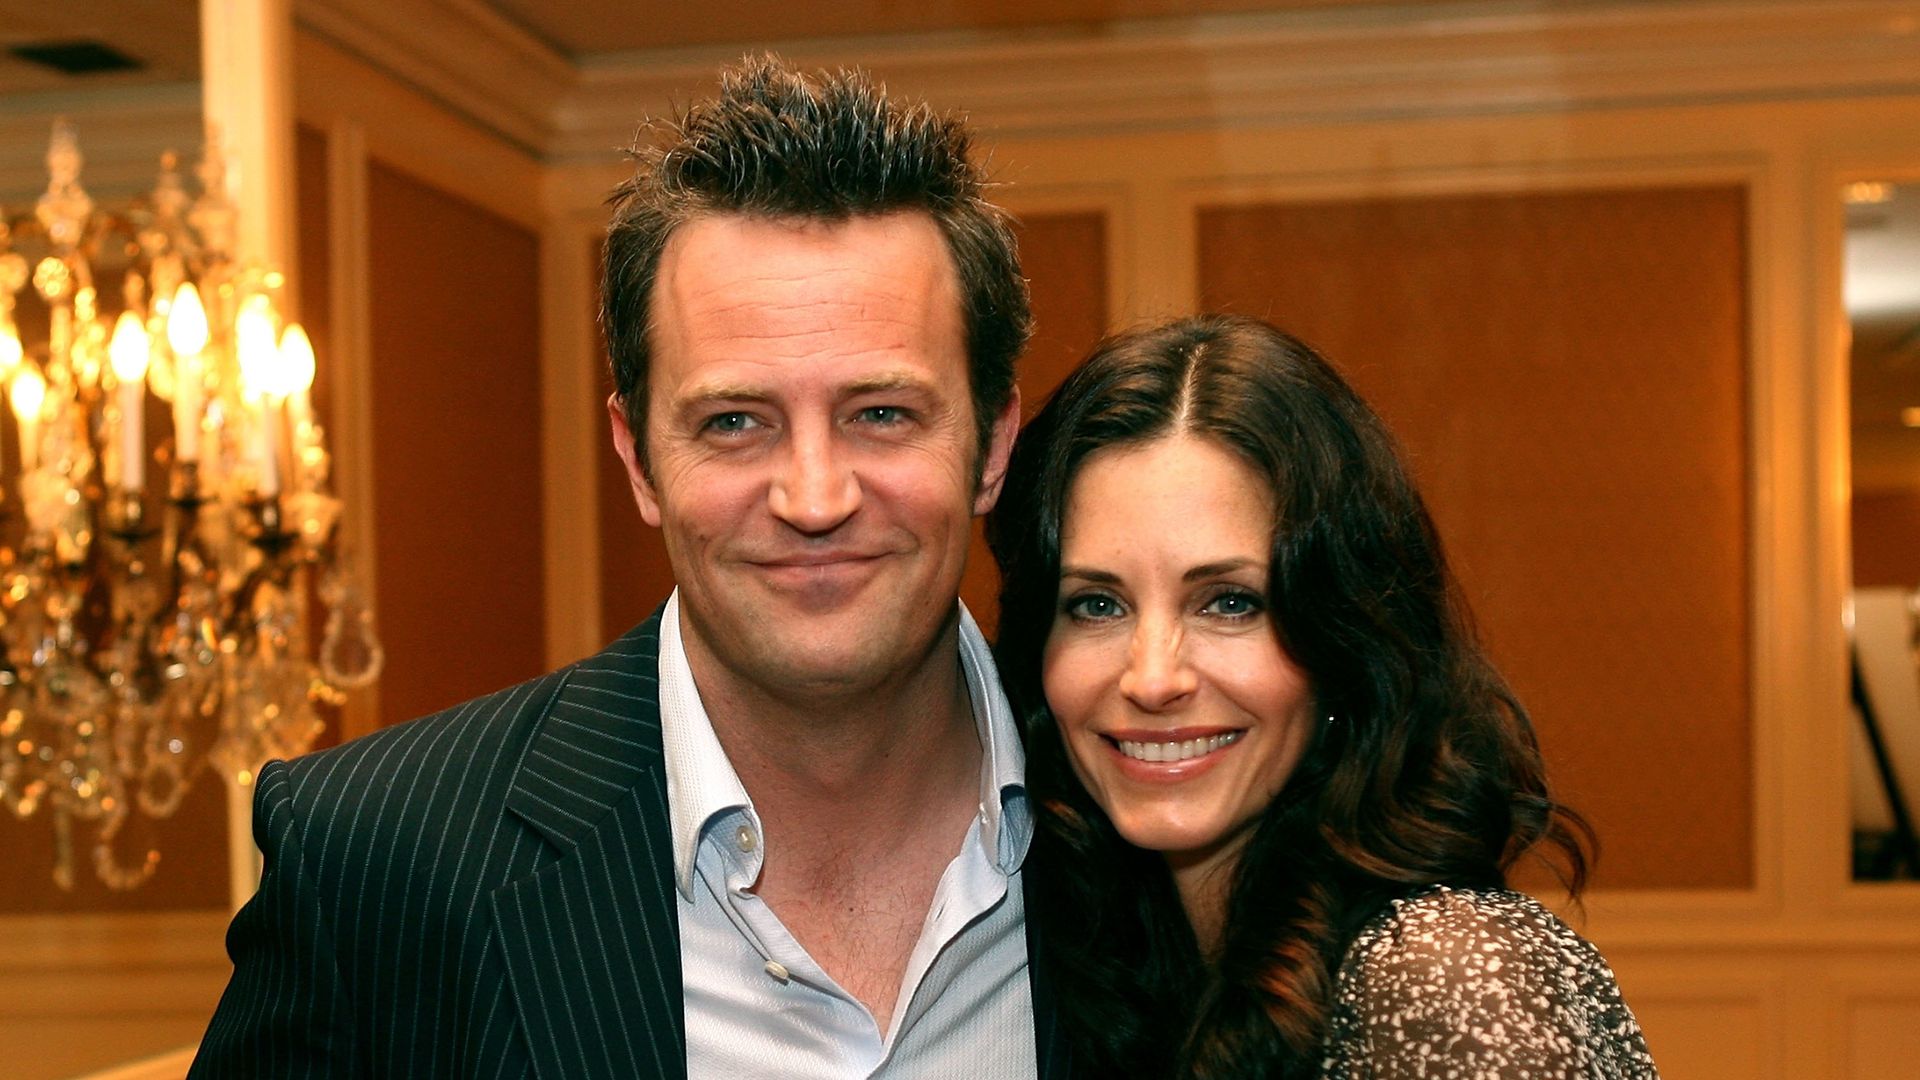 Courteney Cox reflects on Matthew Perry's tragic death months later: 'He visits me a lot'